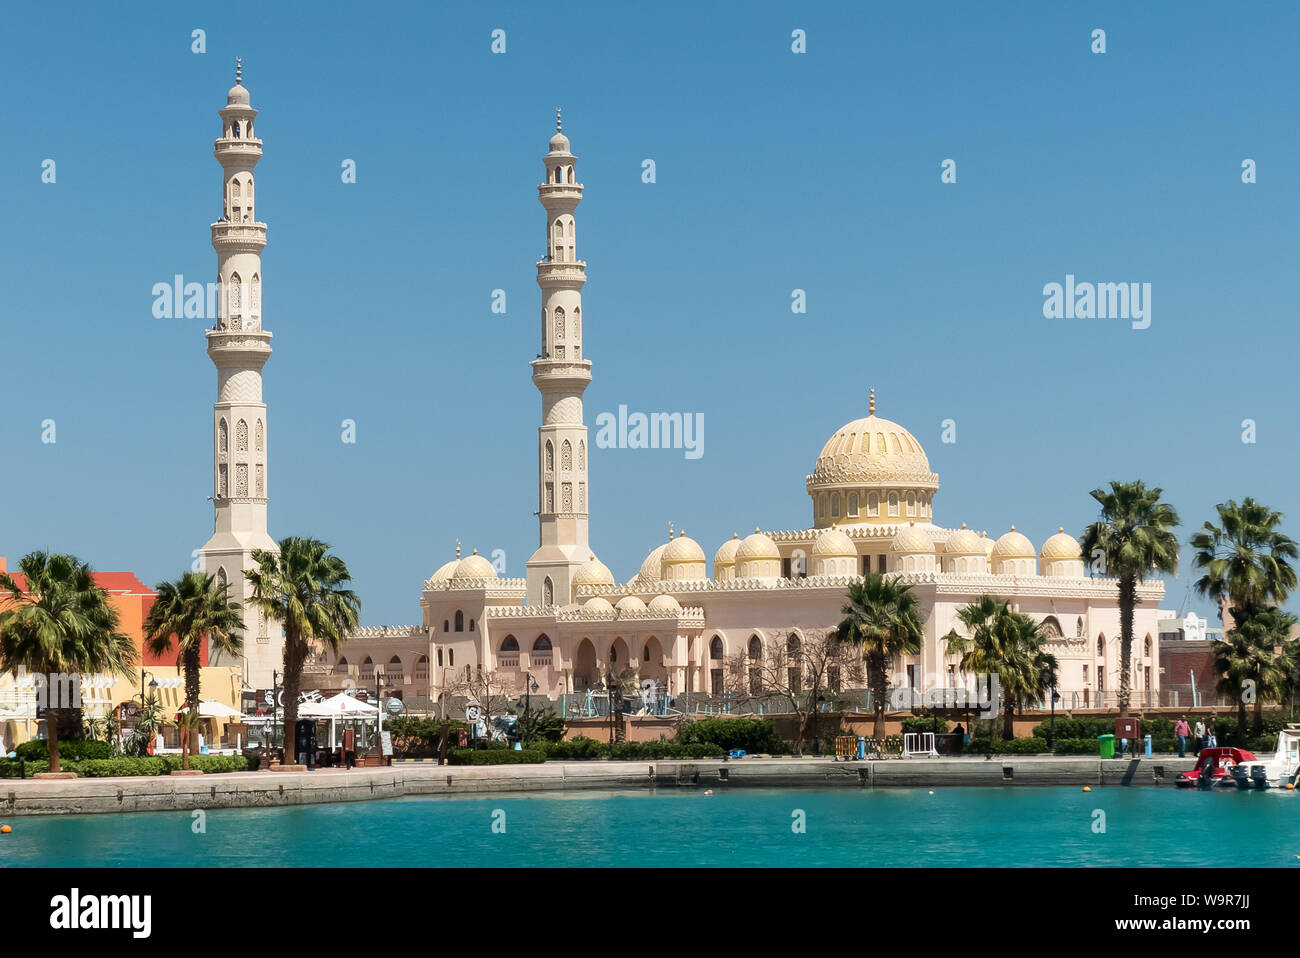 Hurghada in the Egypt: the beautiful Al Mina Mosque near the harbour. Stock Photo